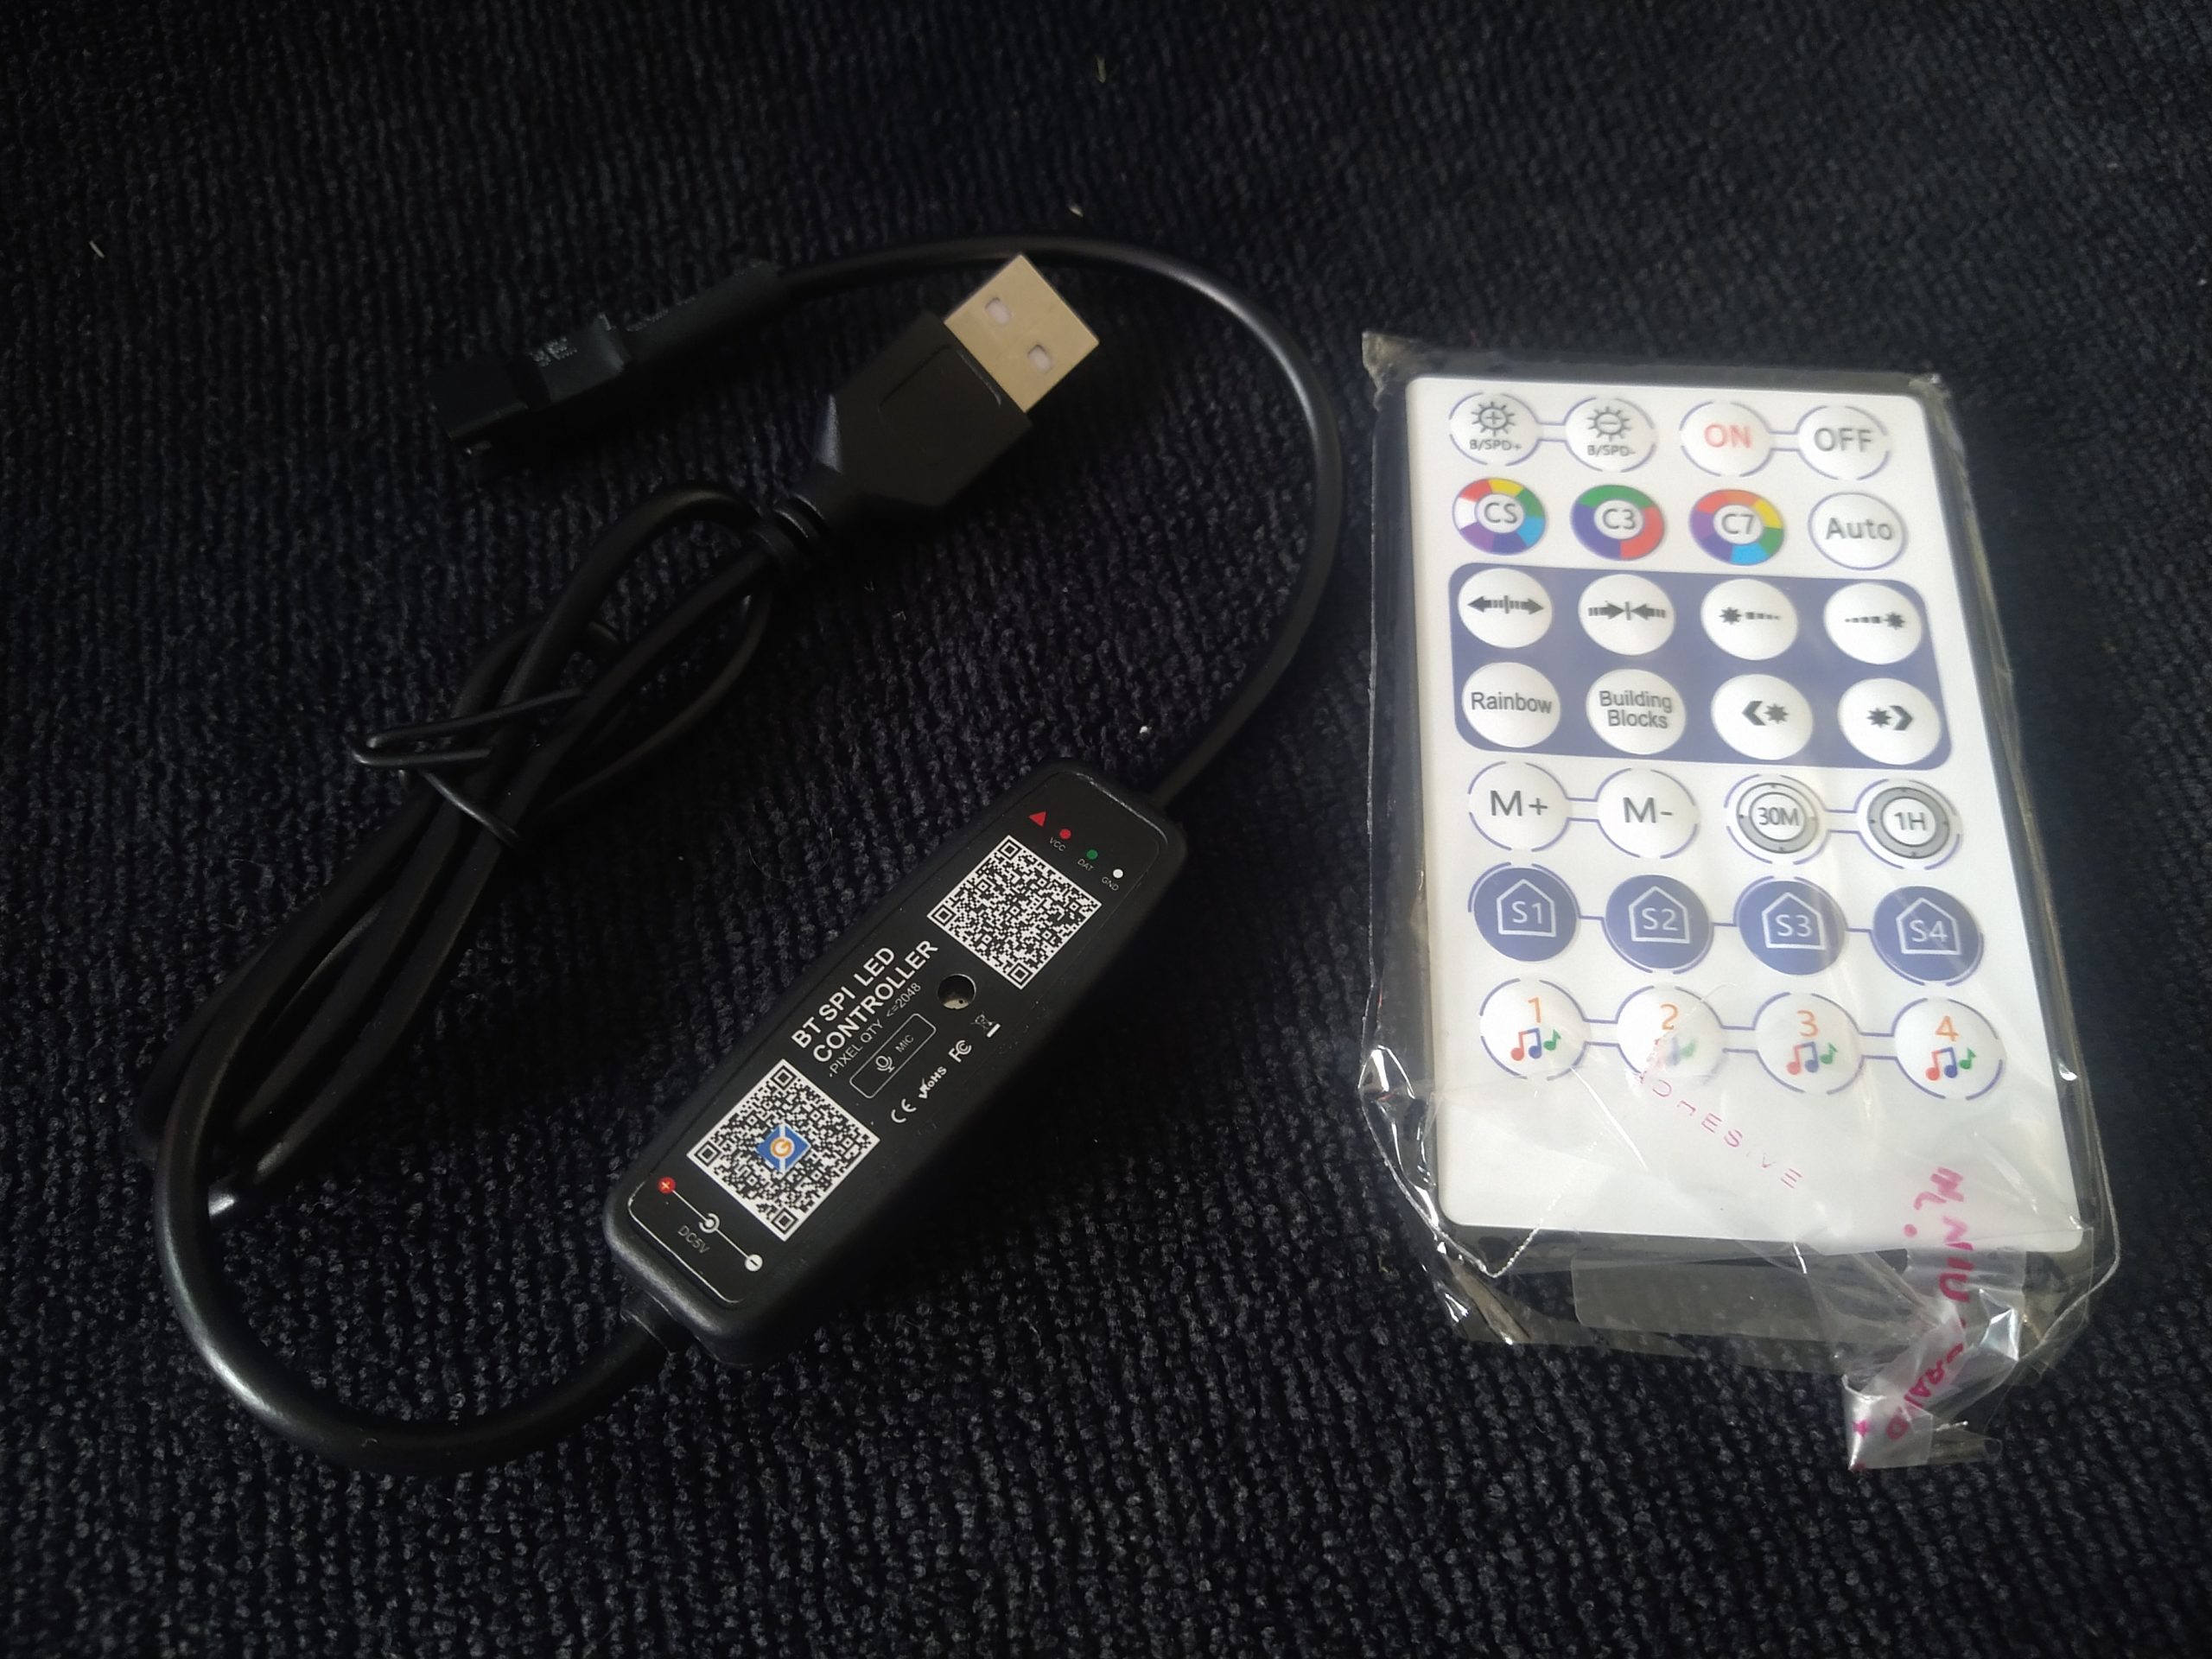 WS2812B WS2811 SPI Music remote / Bluetooth USB Controller Pixel